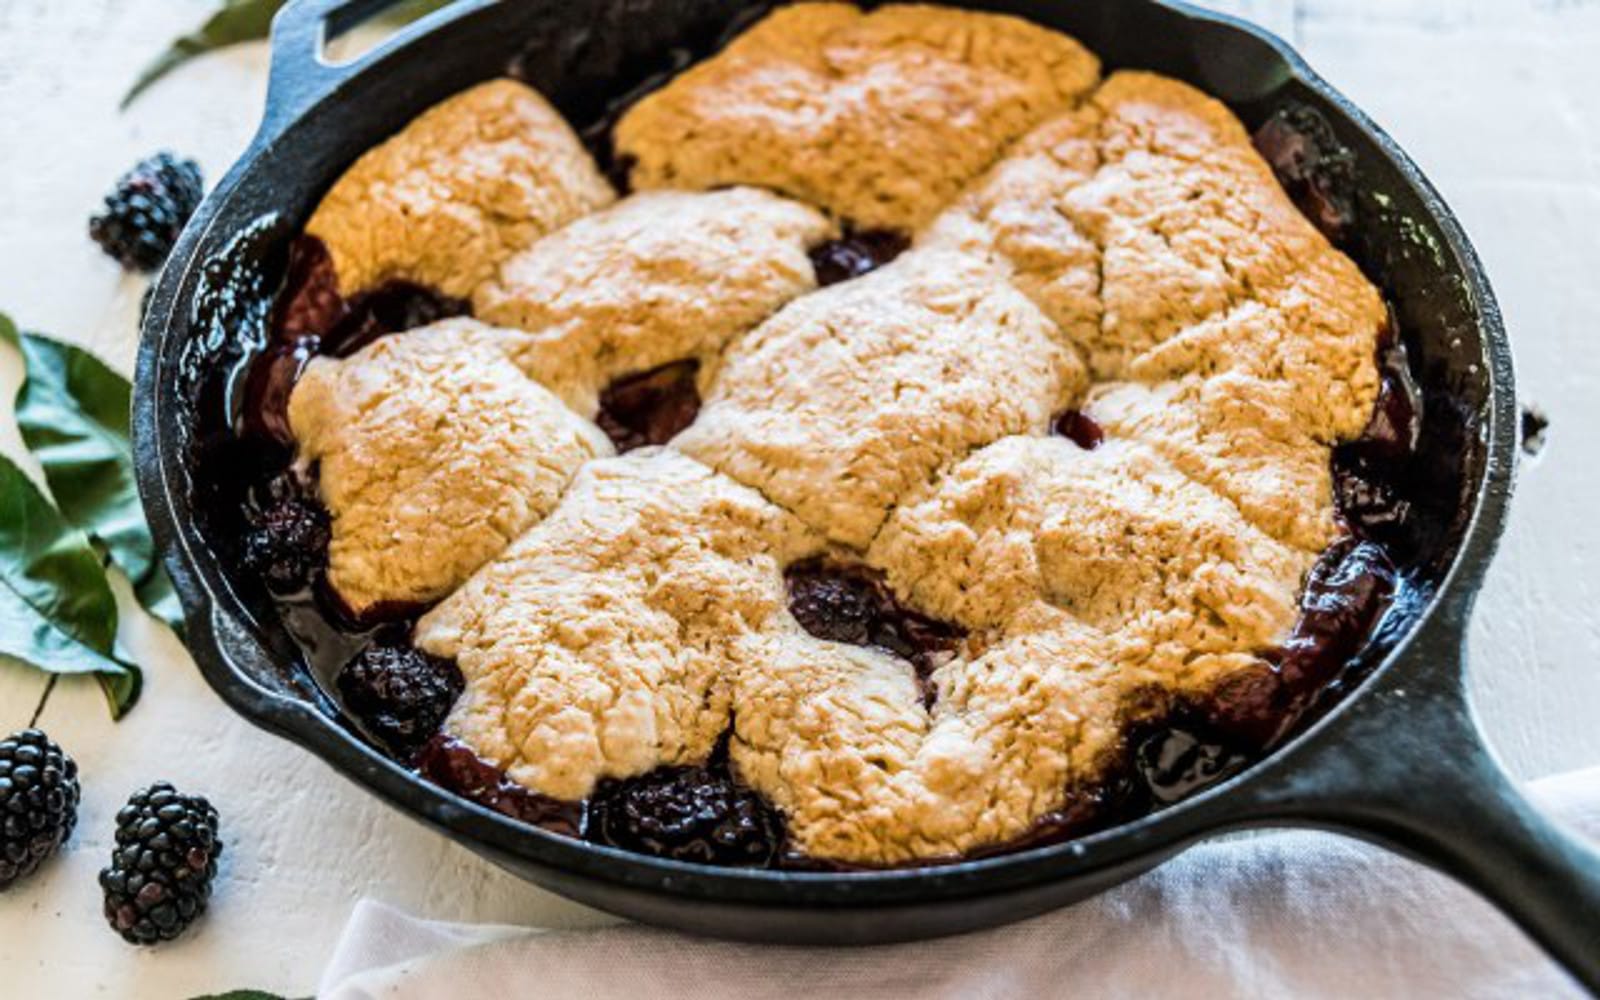 Vegan Blackberry Peach Cobbler With Ginger Spice Biscuits